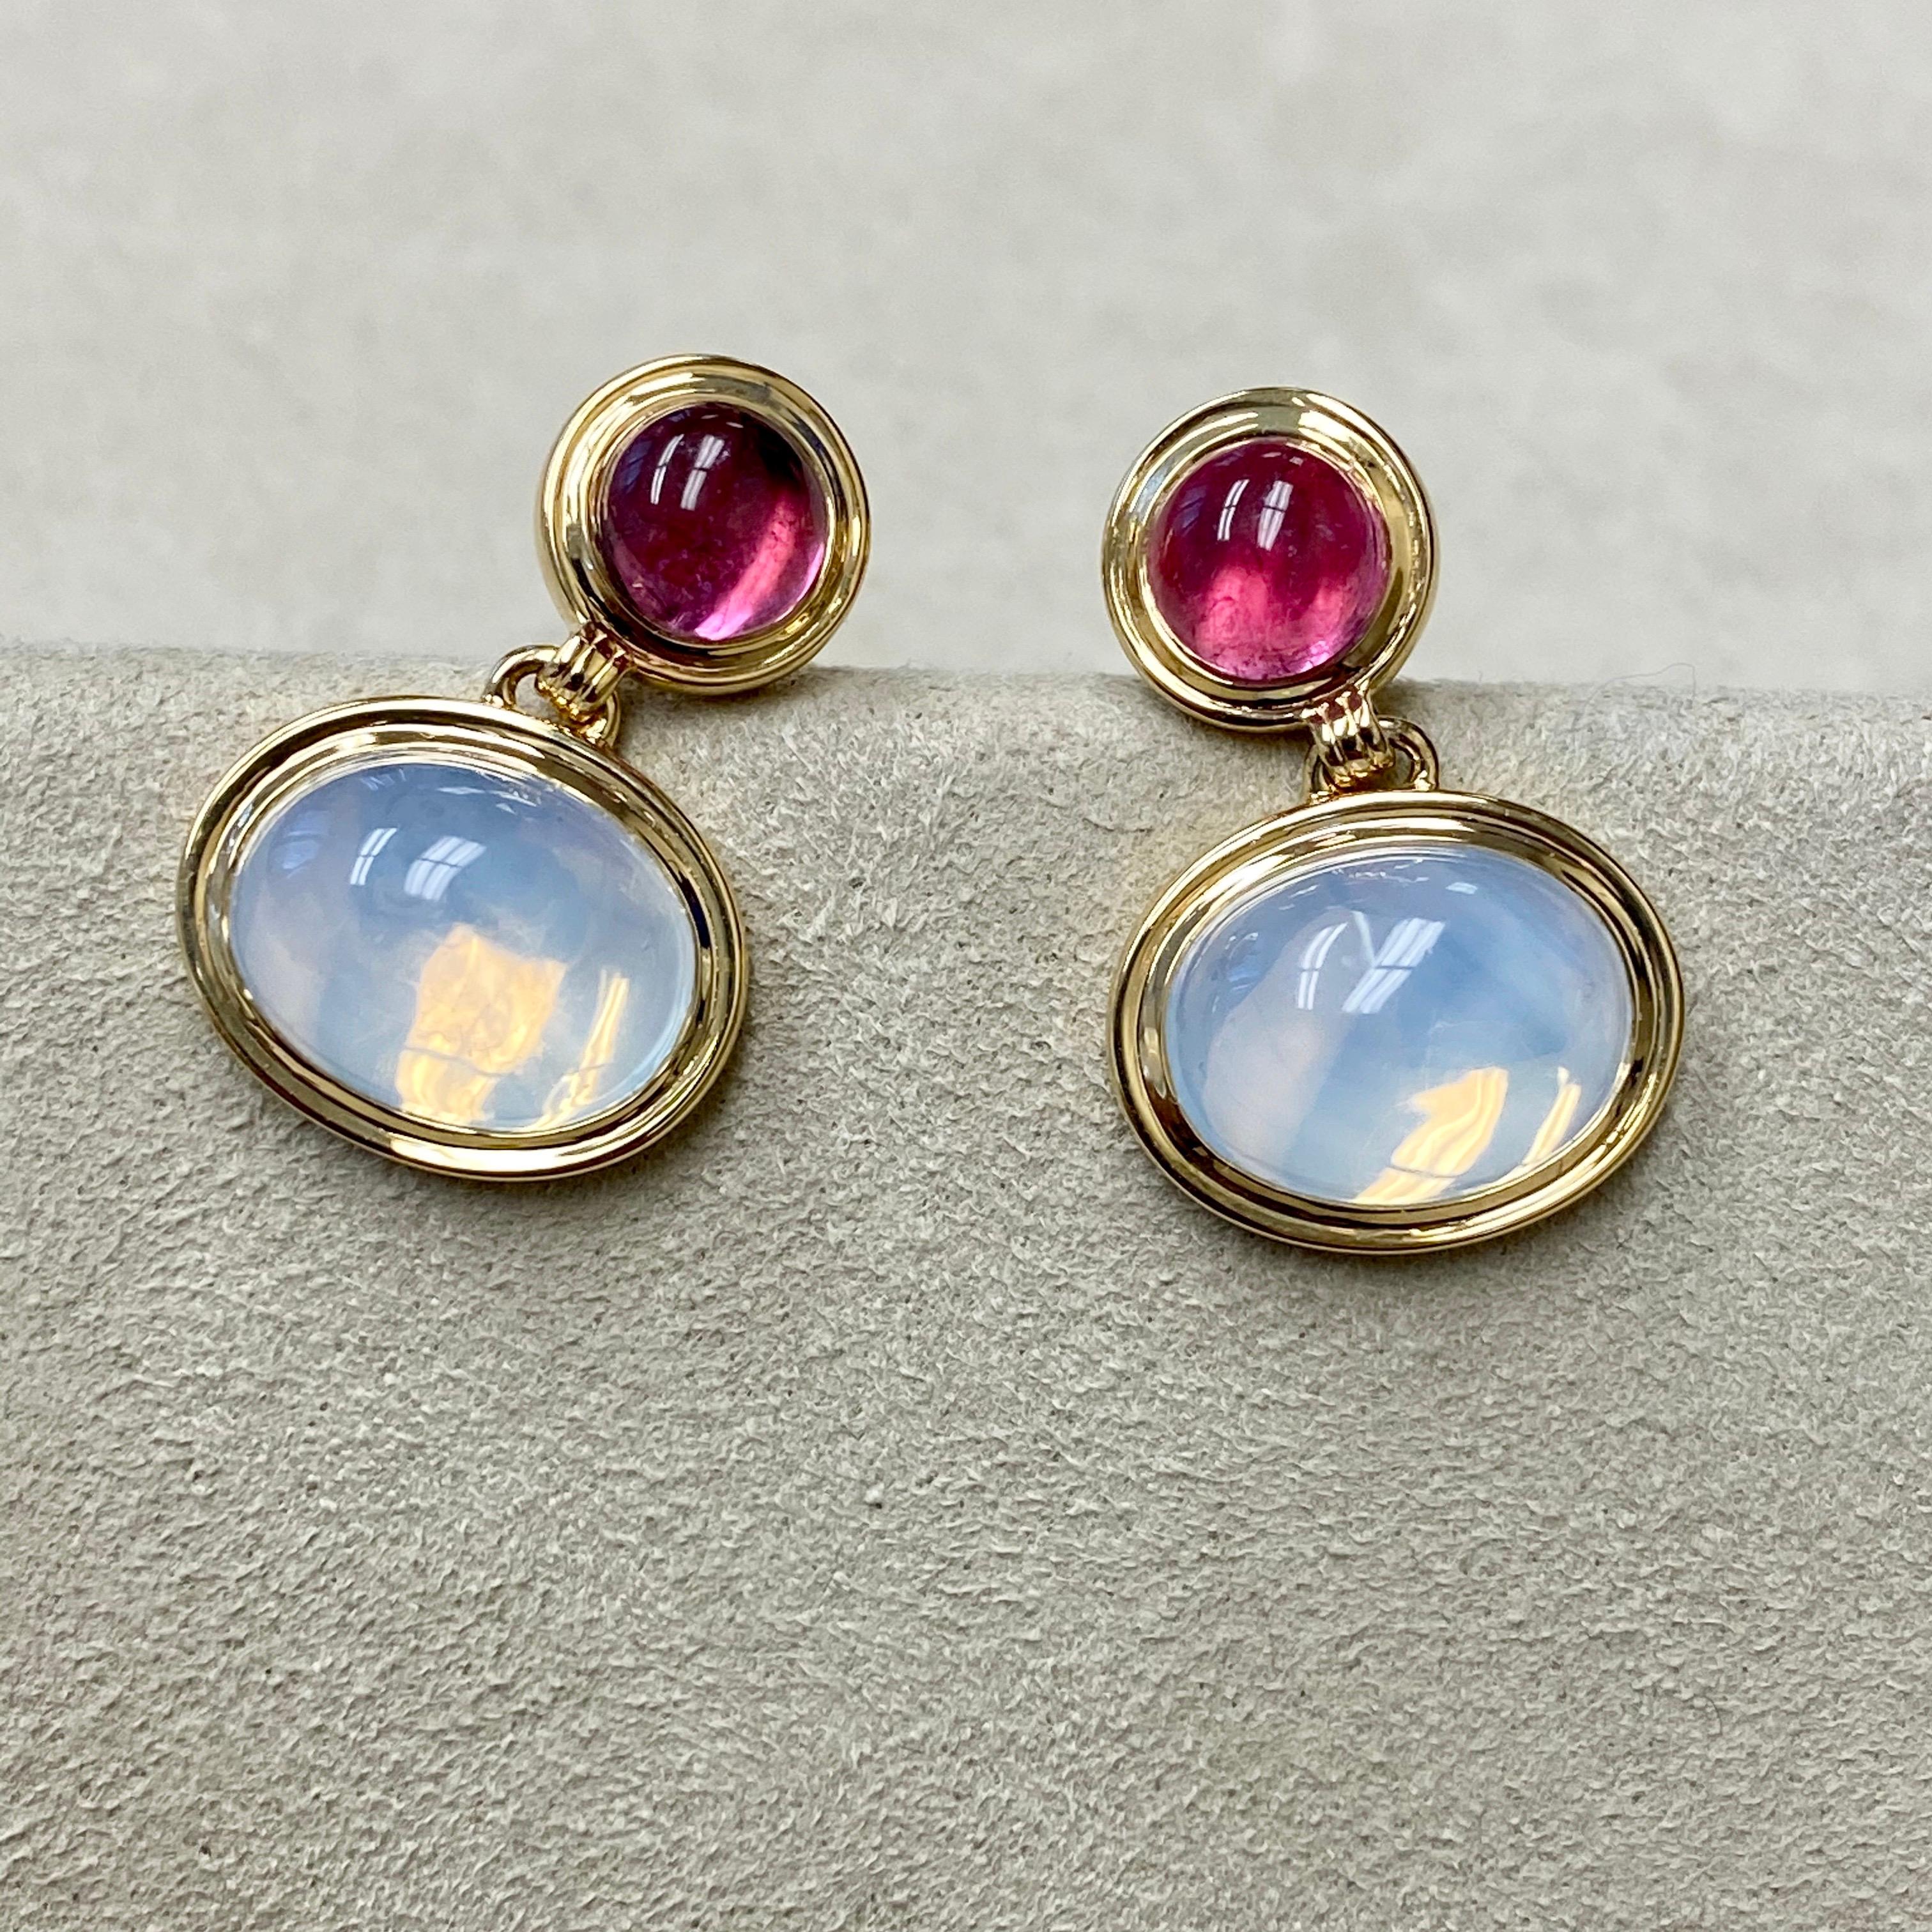 Created in 18 karat yellow gold
Rubellite 3 cts approx
Moon quartz 11 cts approx
Limited Edition

Our limited edition Candy Blue Topaz and Moon Quartz Earrings, crafted with expertise in 18 karat yellow gold, are an exclusive statement of luxury.